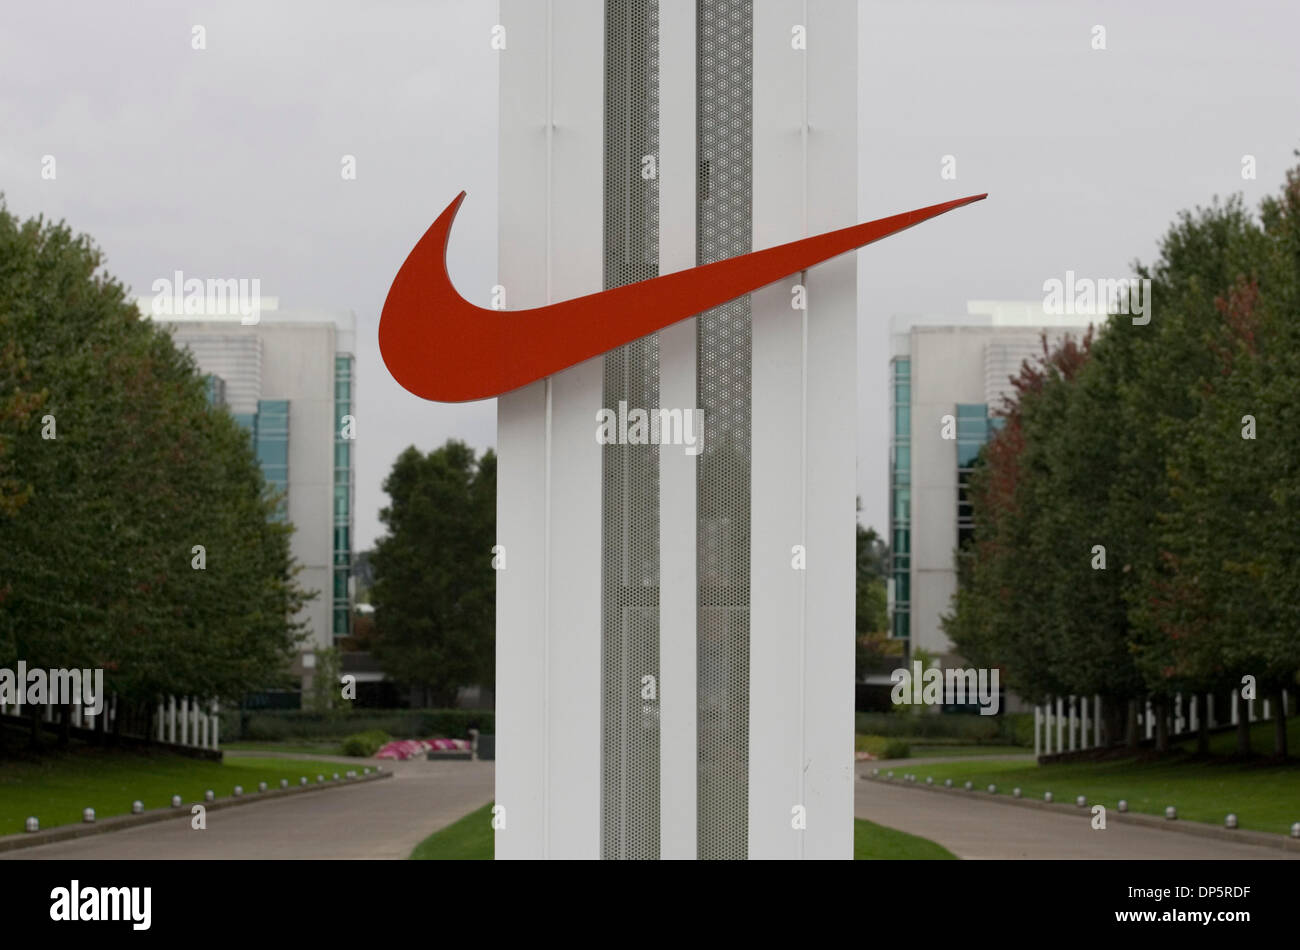 Sep 22, 2006; Beaverton, OR, The Nike logo adorns the entrance to the company's world headquarters in Beaverton, Oregon. Nike is a major manufacturer of athletic shoes, clothing and sports